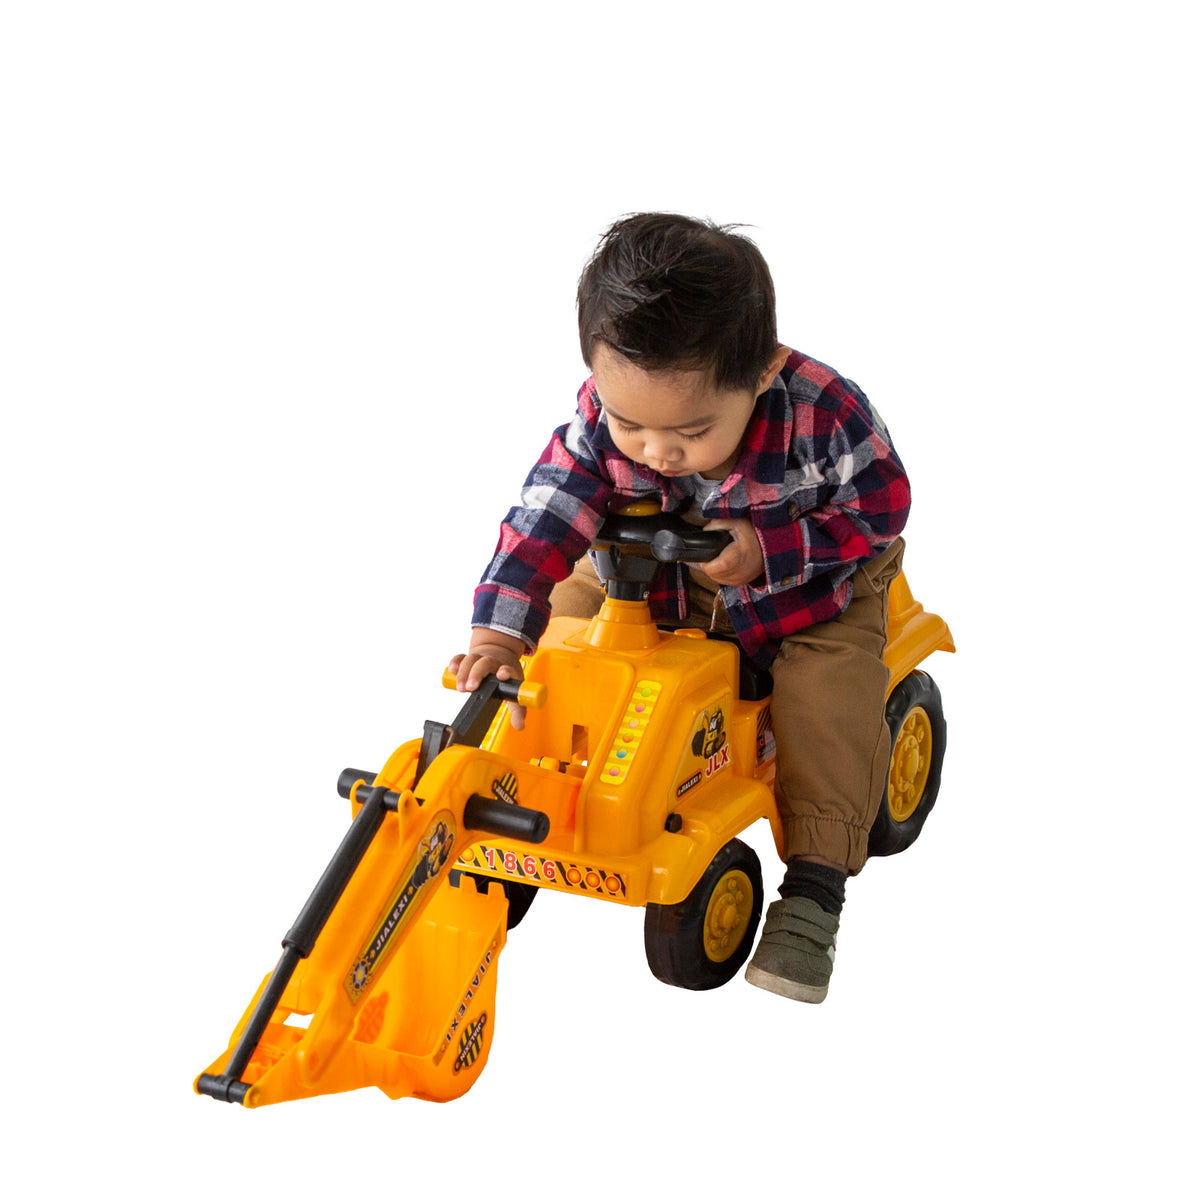 Little boy playing with the yellow ride-on toy excavator.